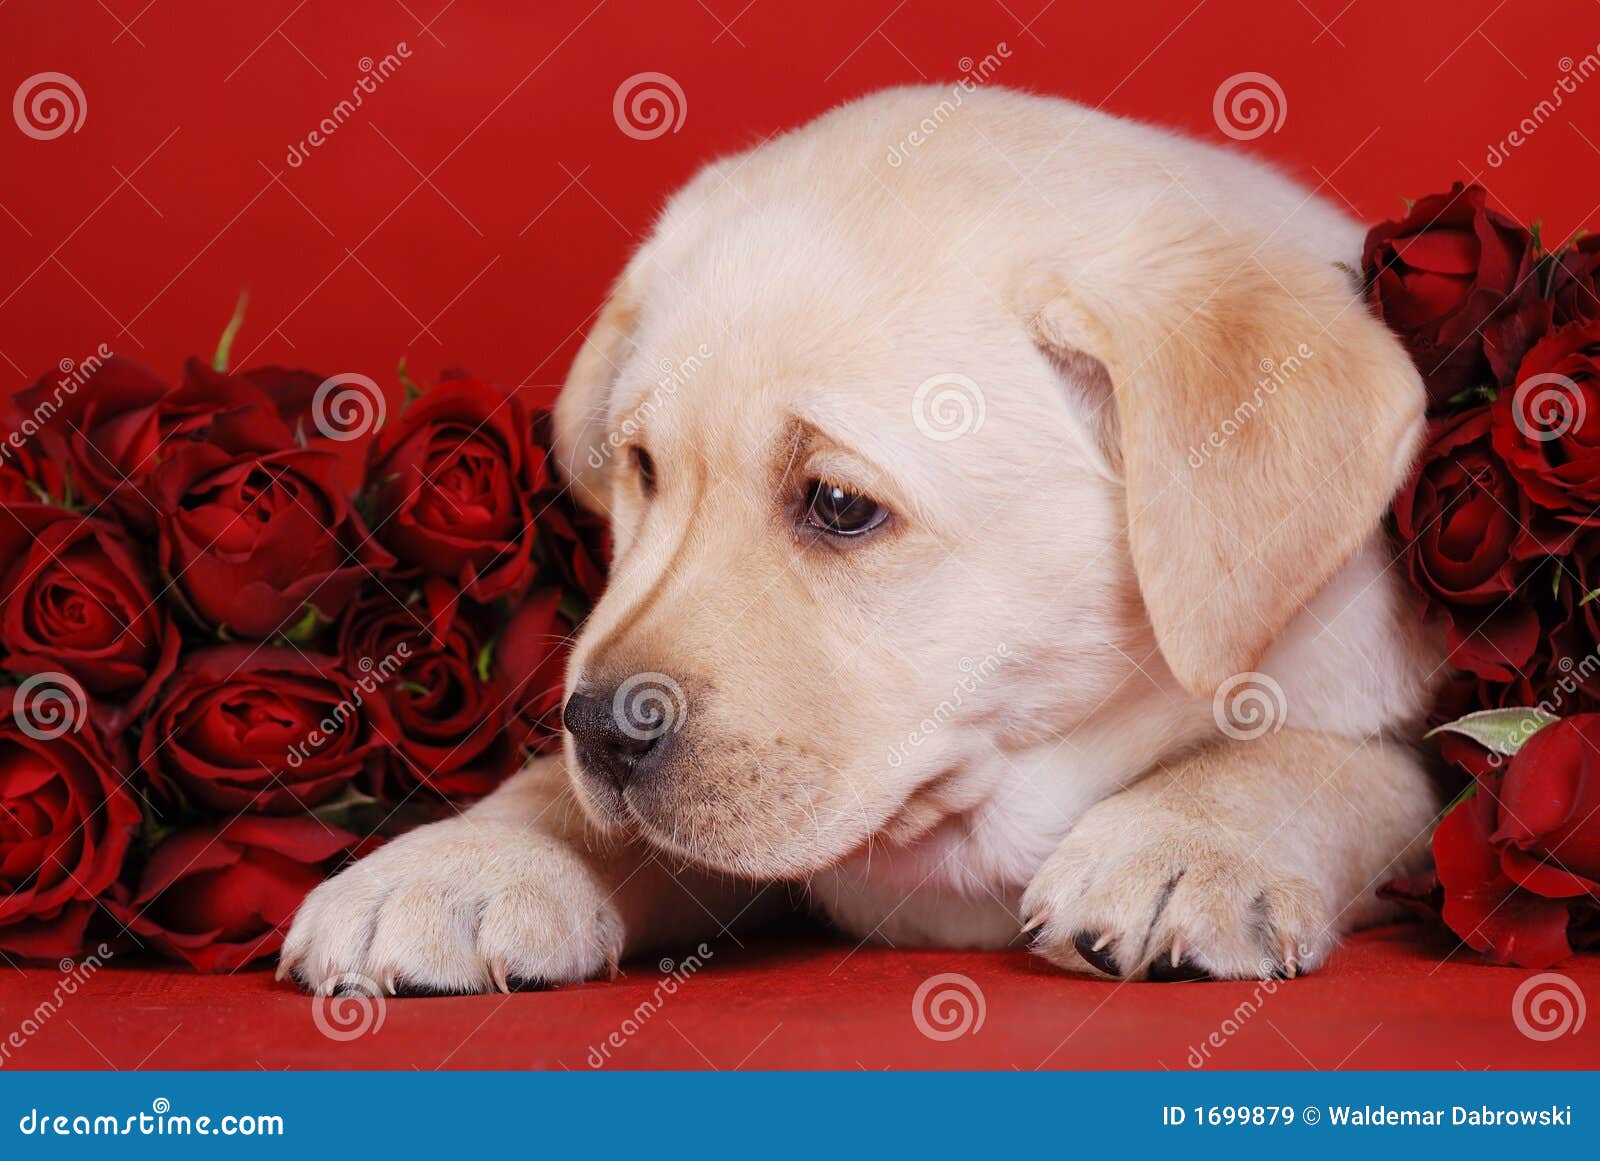 Puppy and roses stock image. Image of emotion, friendship - 1699879